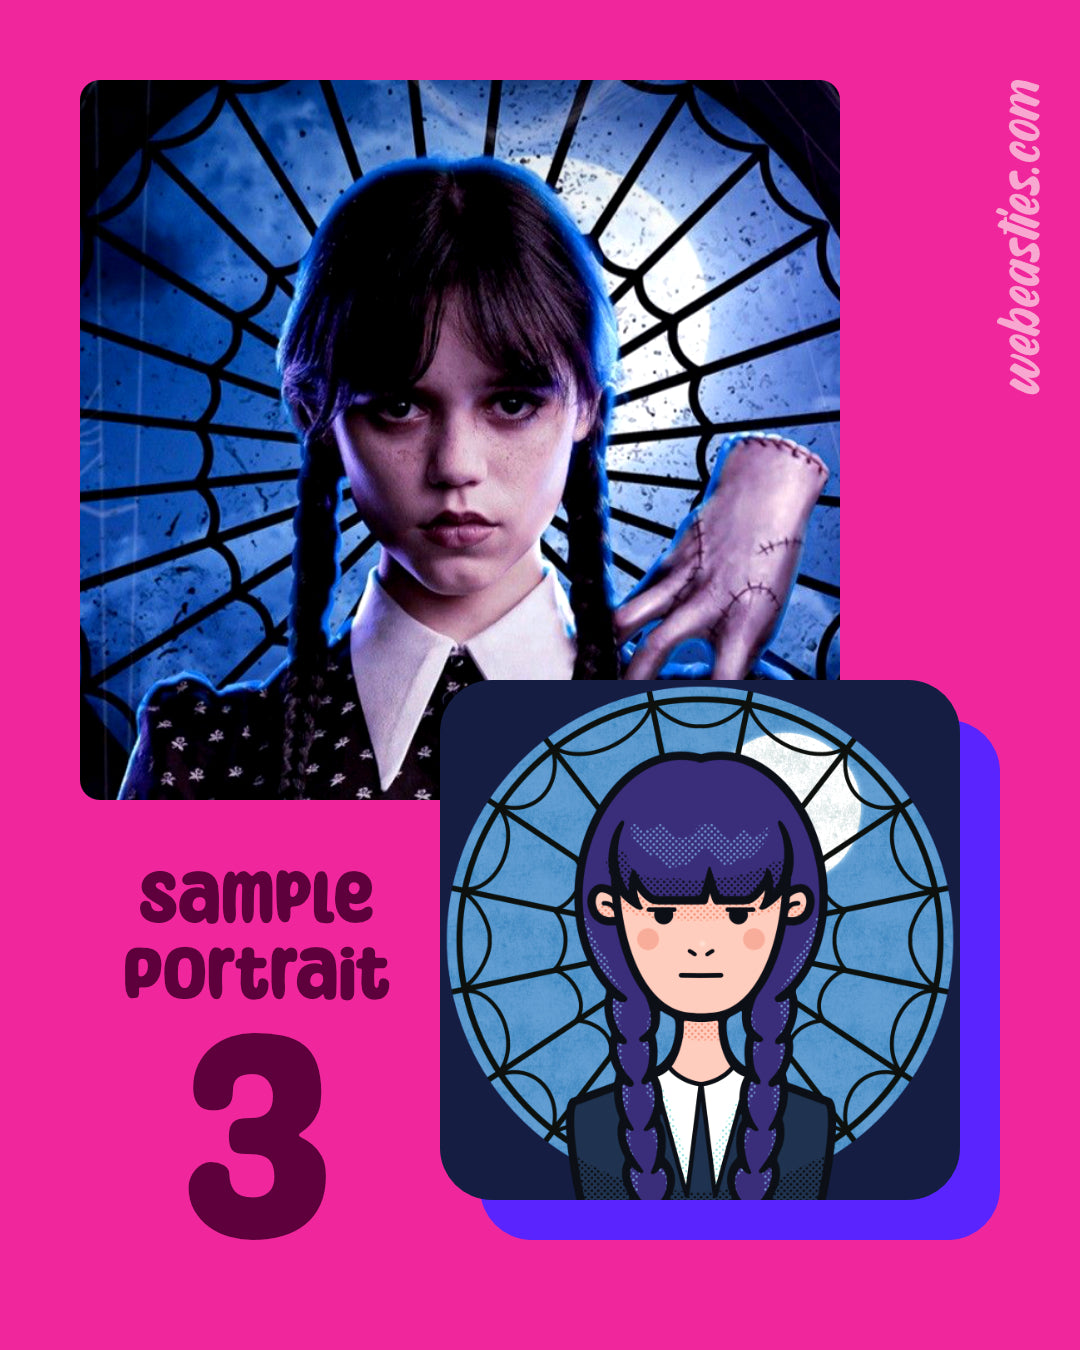 A sample profile picture featuring Jenna Ortega as Wednesday Addams in front of a spider-web stained glass window.